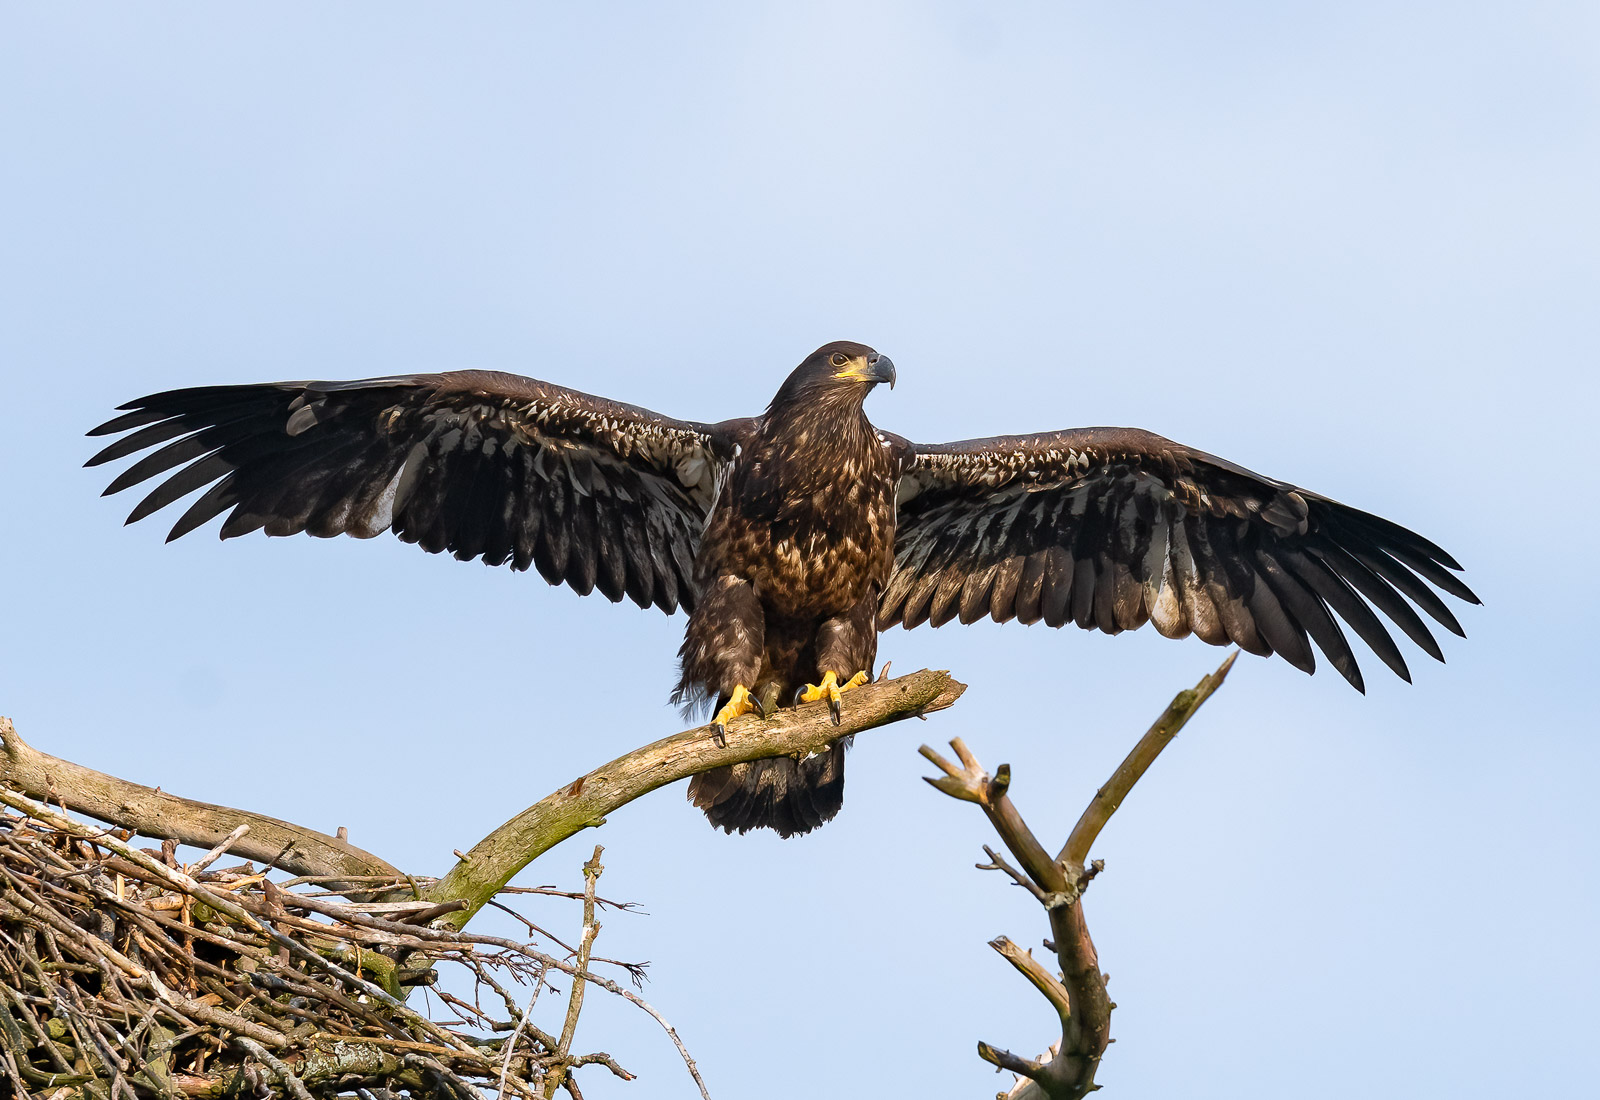 Eaglet spreading its wing preparing to fledge